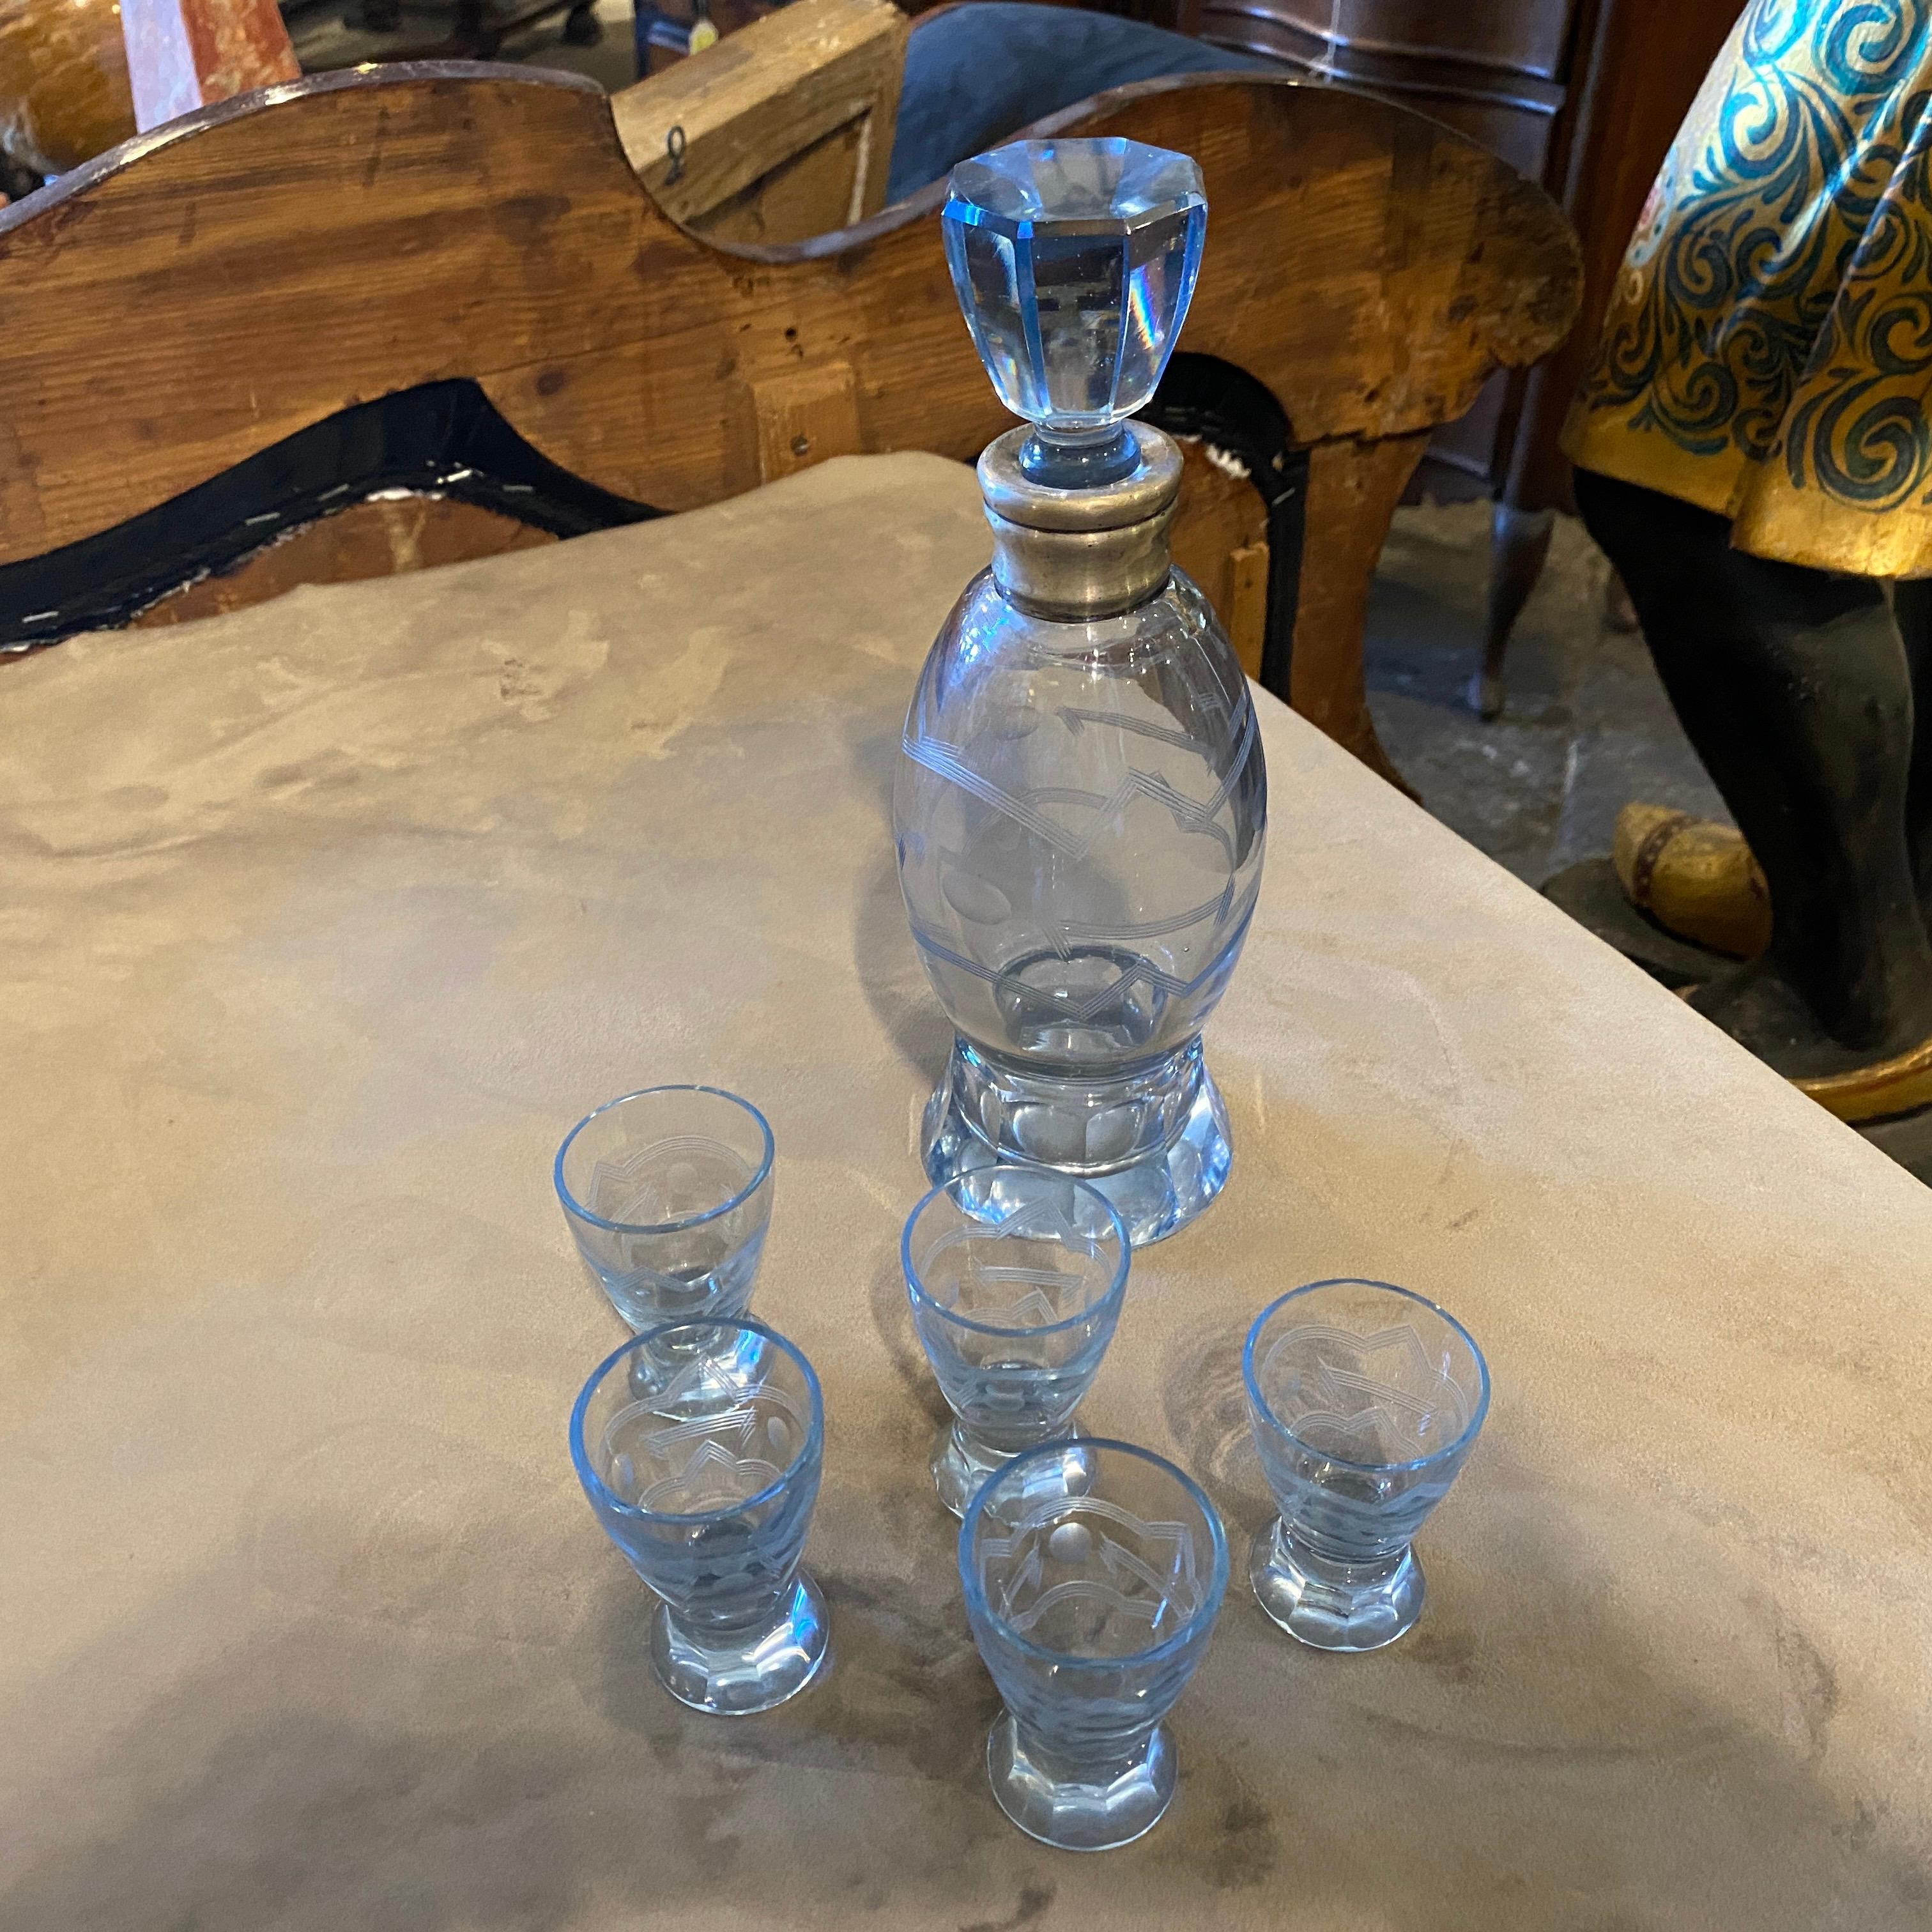 A 6 pieces liquor set made in Italy in the Thirties, it's composed by a silver and glass bottle and five glasses, all of them are in perfect conditions. 